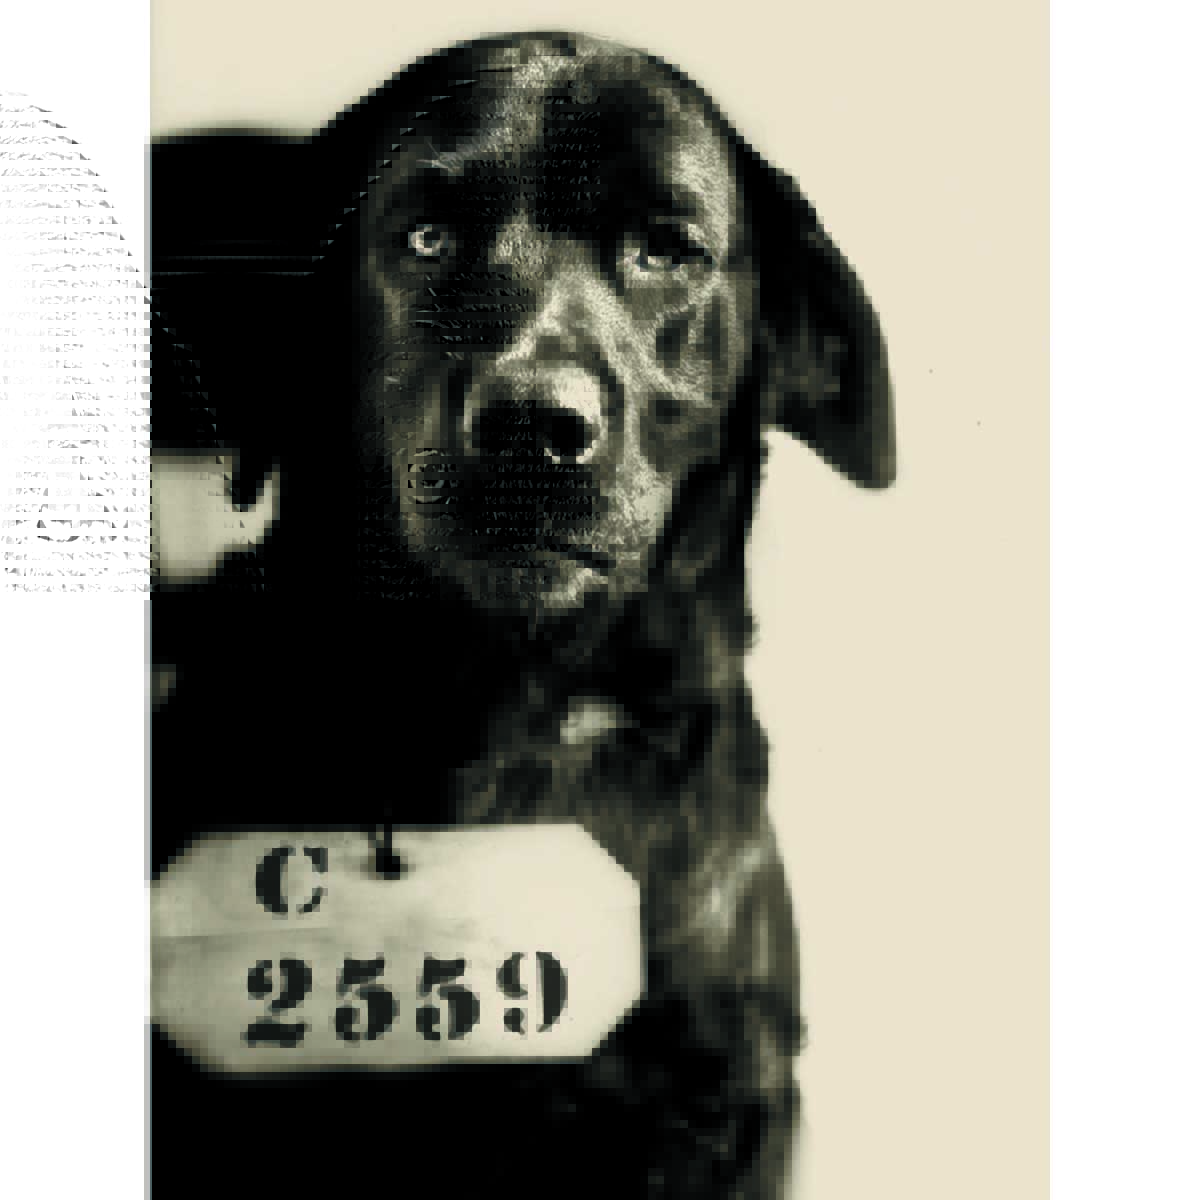 Dog Sentenced to Life Without Parole in Haunted Prison